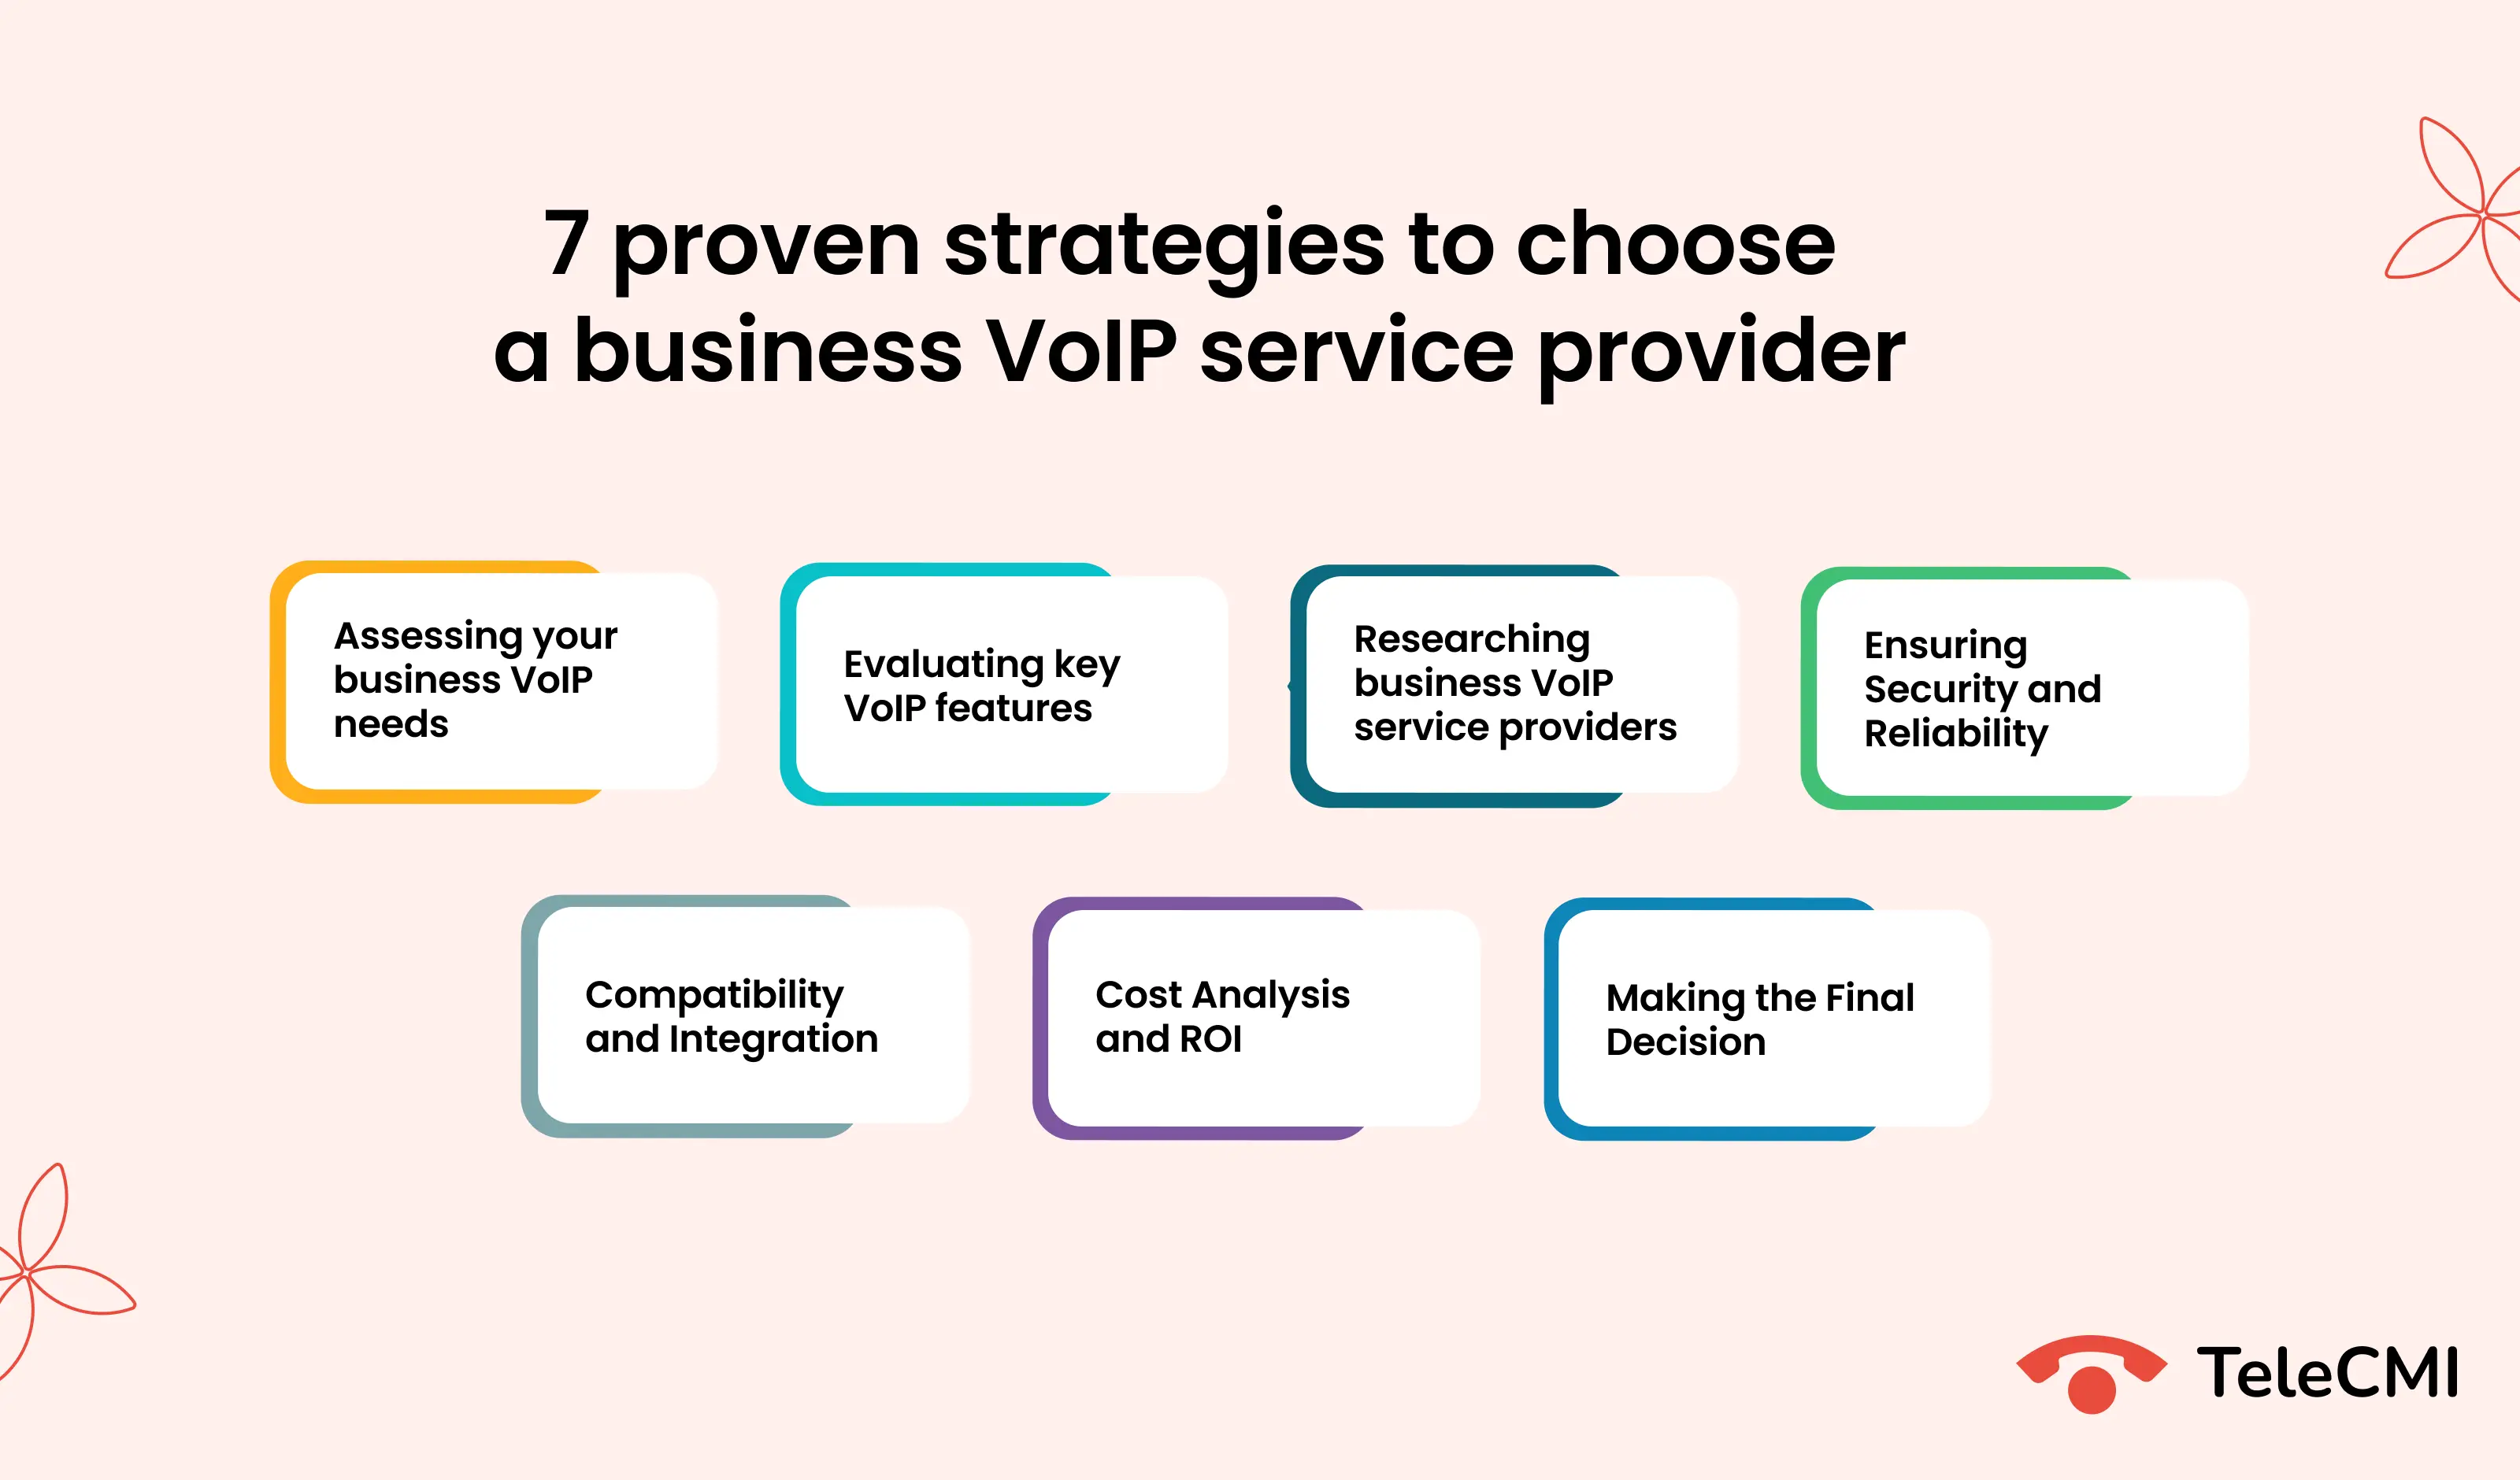 7 Proven Strategies to Choose a Business VoIP Service Provider